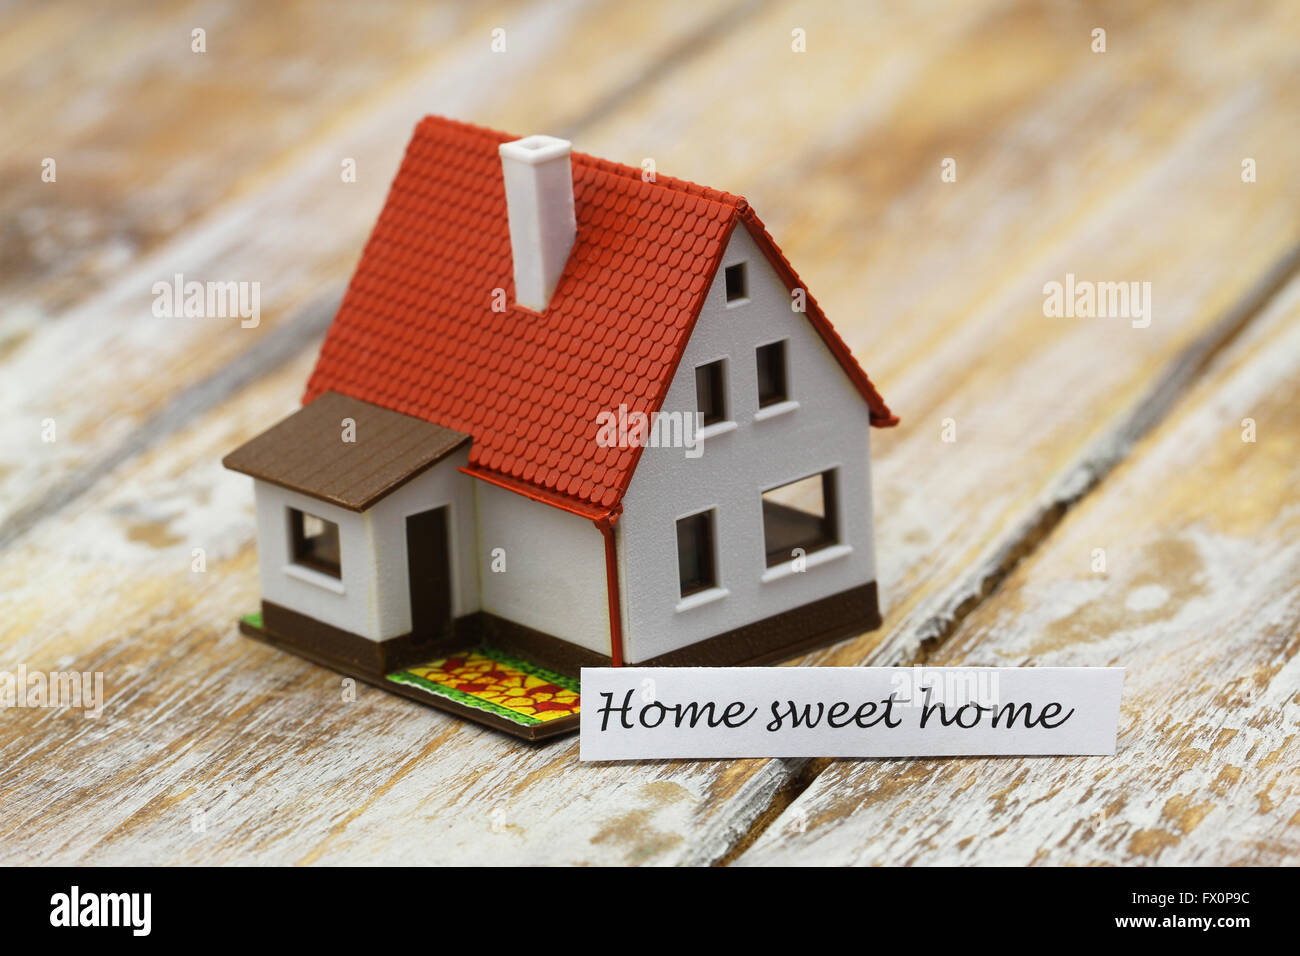 Home sweet home card with miniature model of a house Stock Photo